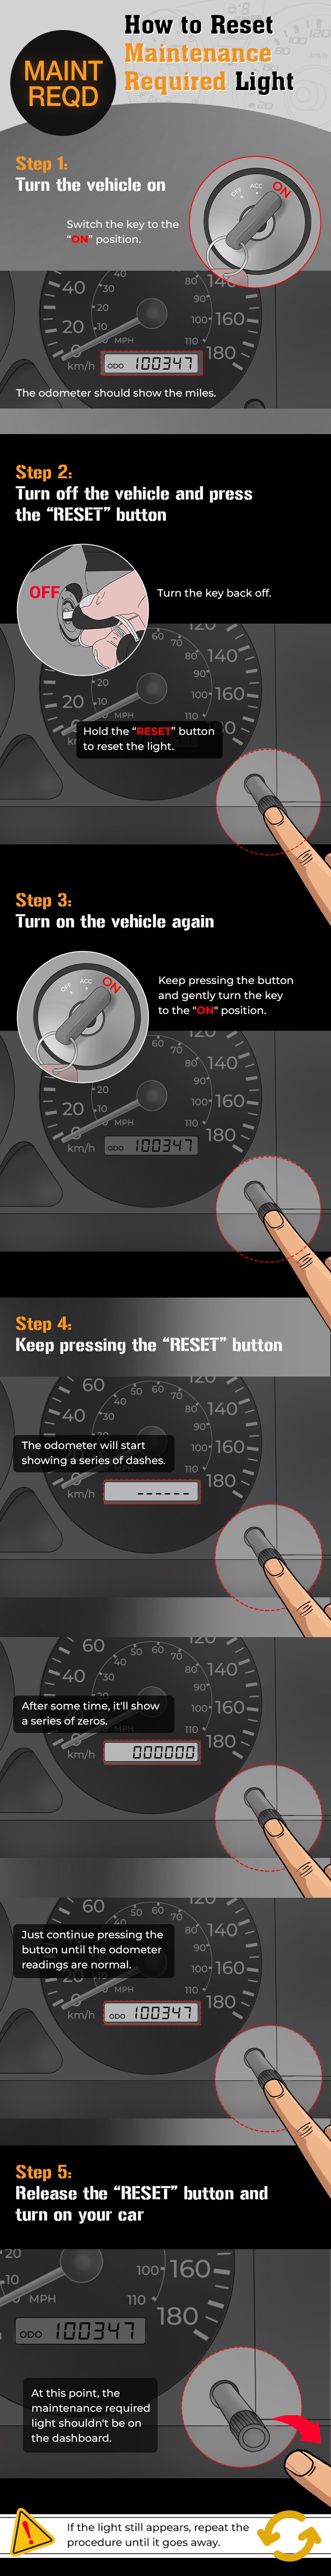 How to Reset the Maintenance Required Light  